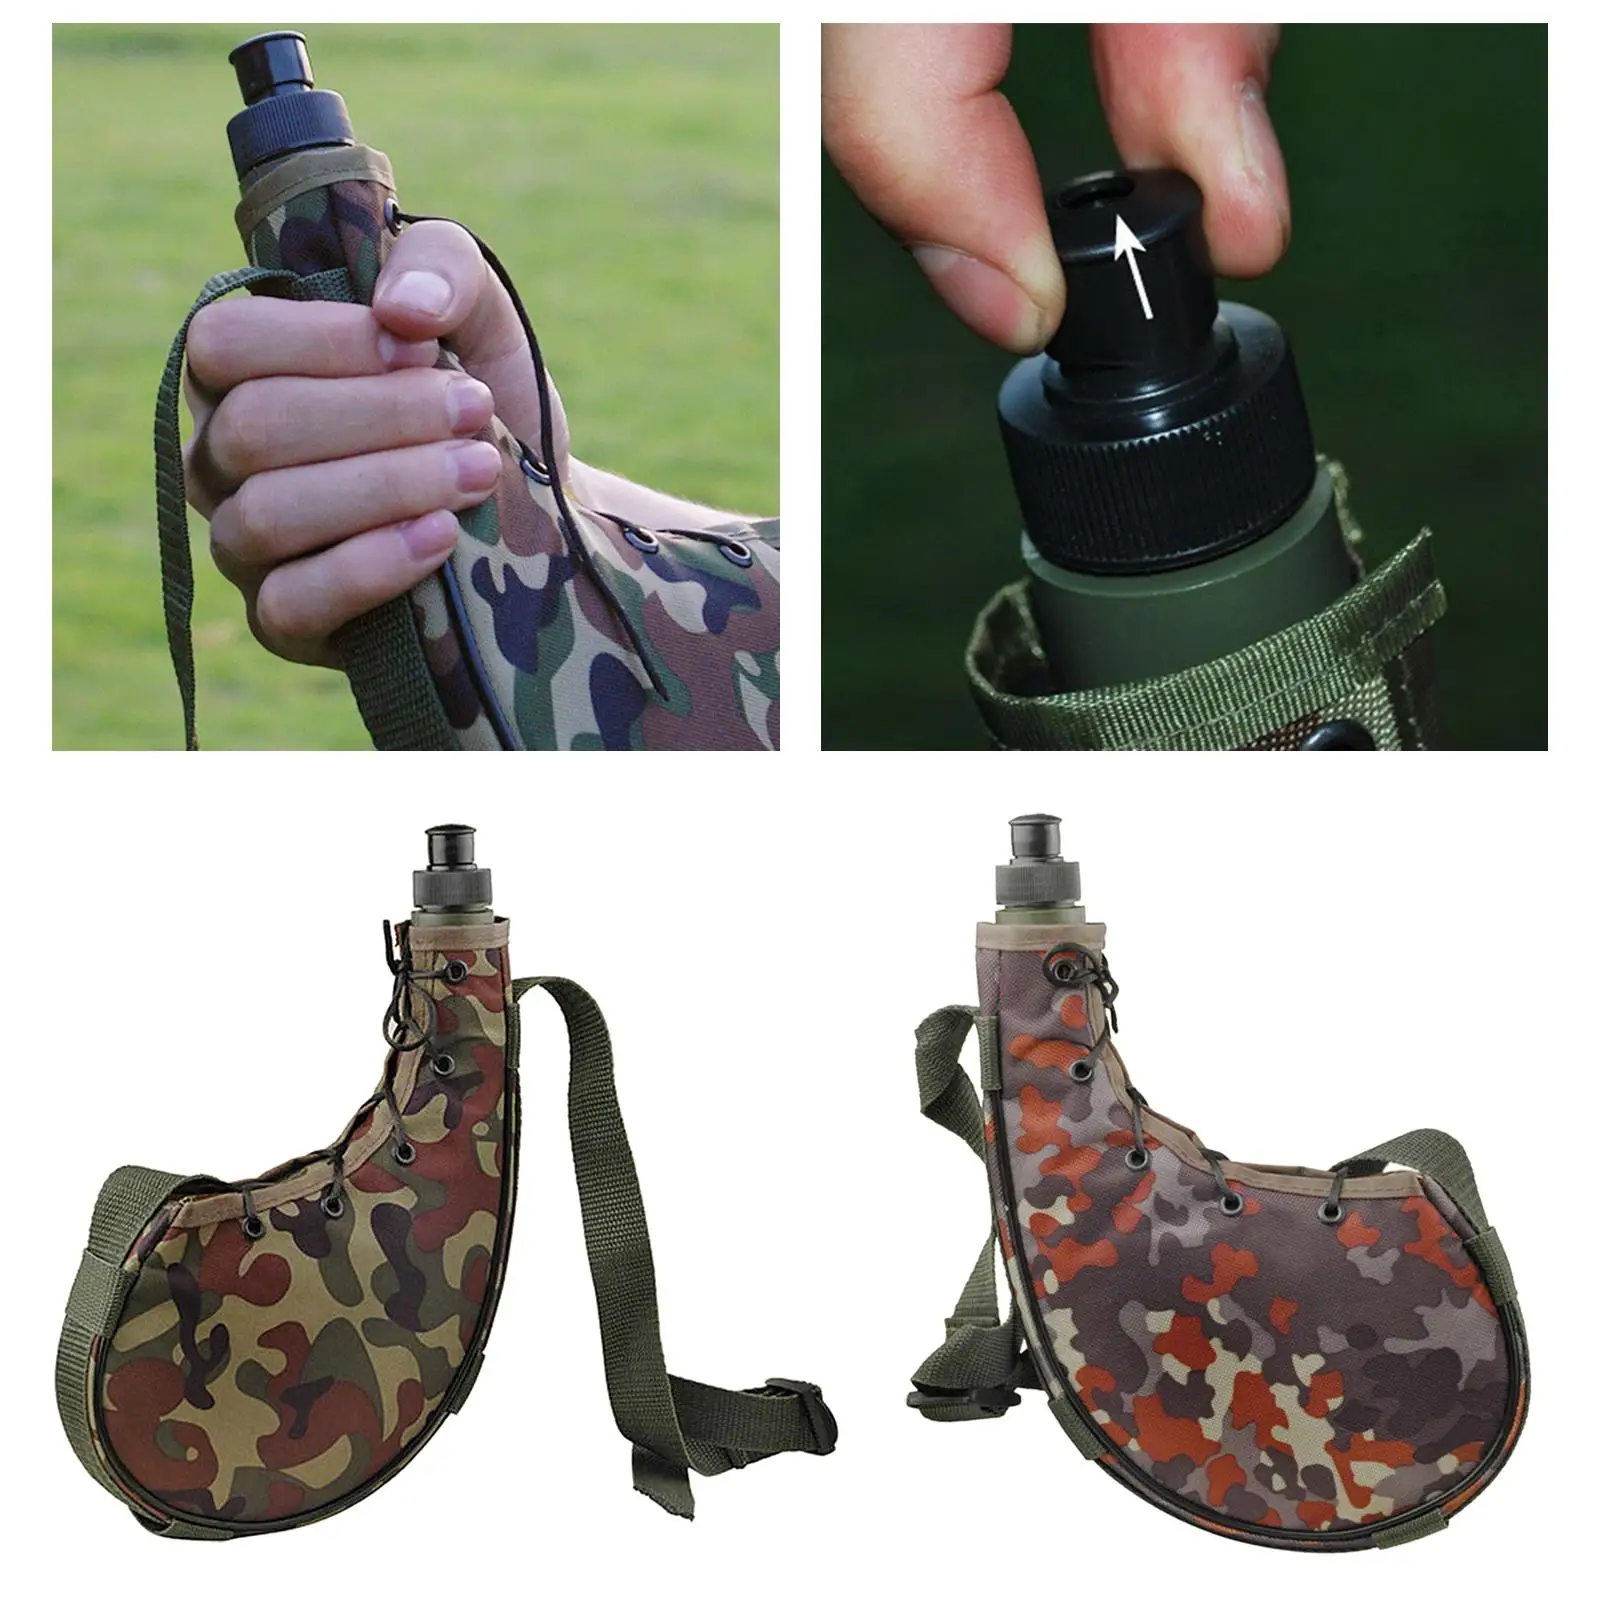 Portable Outdoor Water Bottle Travel Drinkware Camping Flask Shoulder Strap Kettle for Climbing Fishing Hunting